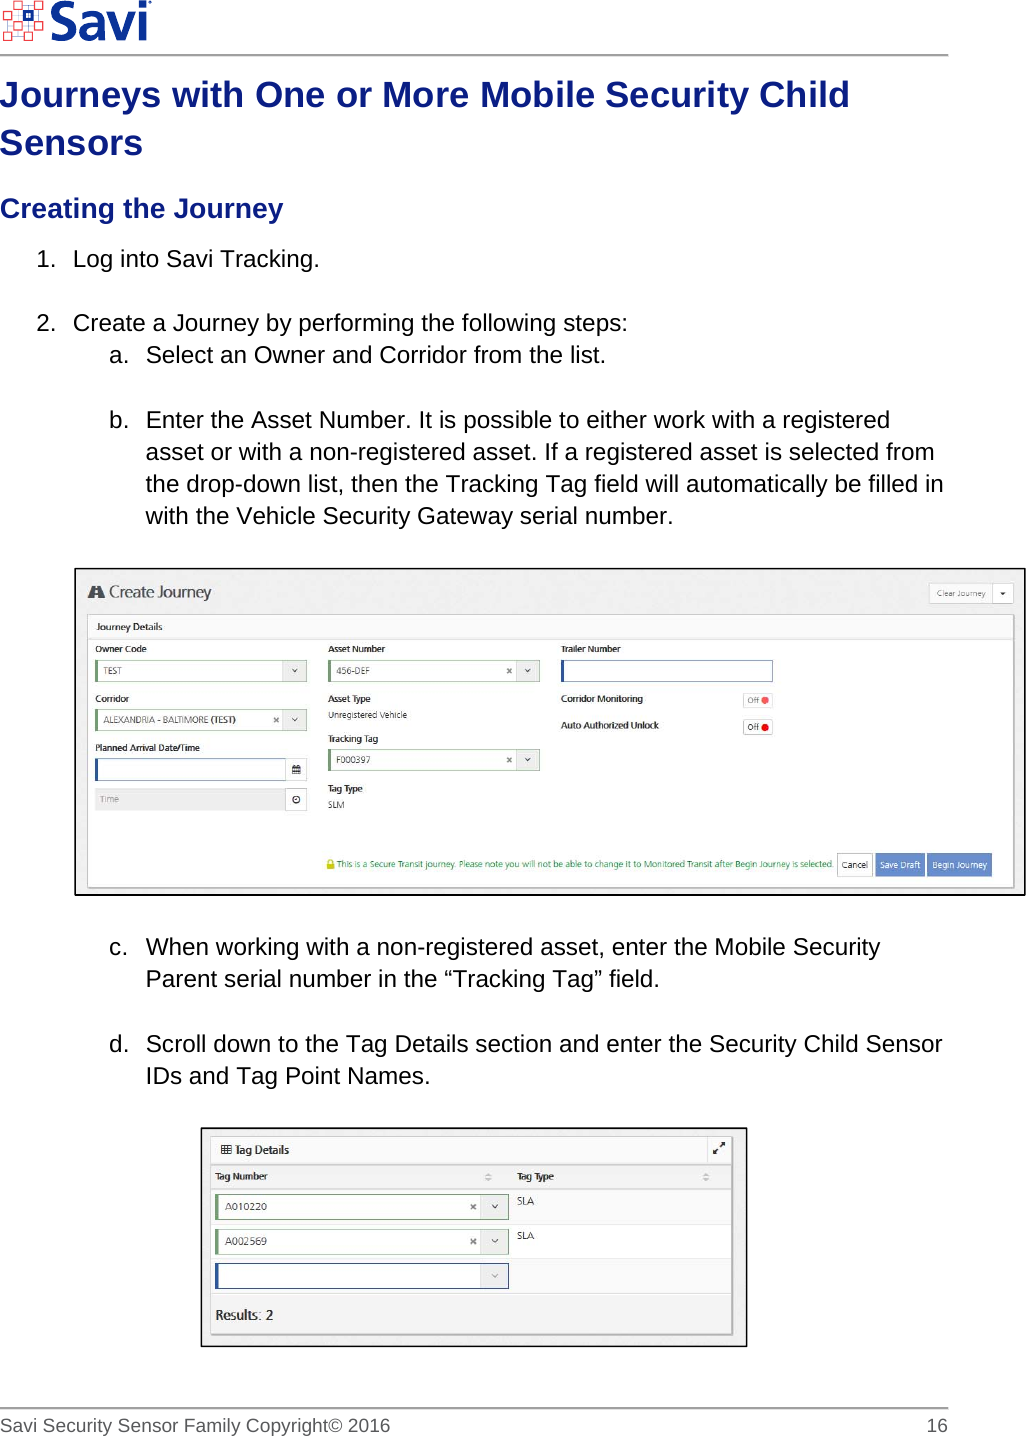        Savi Security Sensor Family Copyright© 2016     16  Journeys with One or More Mobile Security Child Sensors Creating the Journey 1.  Log into Savi Tracking.  2.  Create a Journey by performing the following steps: a.  Select an Owner and Corridor from the list.  b.  Enter the Asset Number. It is possible to either work with a registered asset or with a non-registered asset. If a registered asset is selected from the drop-down list, then the Tracking Tag field will automatically be filled in with the Vehicle Security Gateway serial number.    c.  When working with a non-registered asset, enter the Mobile Security Parent serial number in the “Tracking Tag” field.  d.  Scroll down to the Tag Details section and enter the Security Child Sensor IDs and Tag Point Names.   